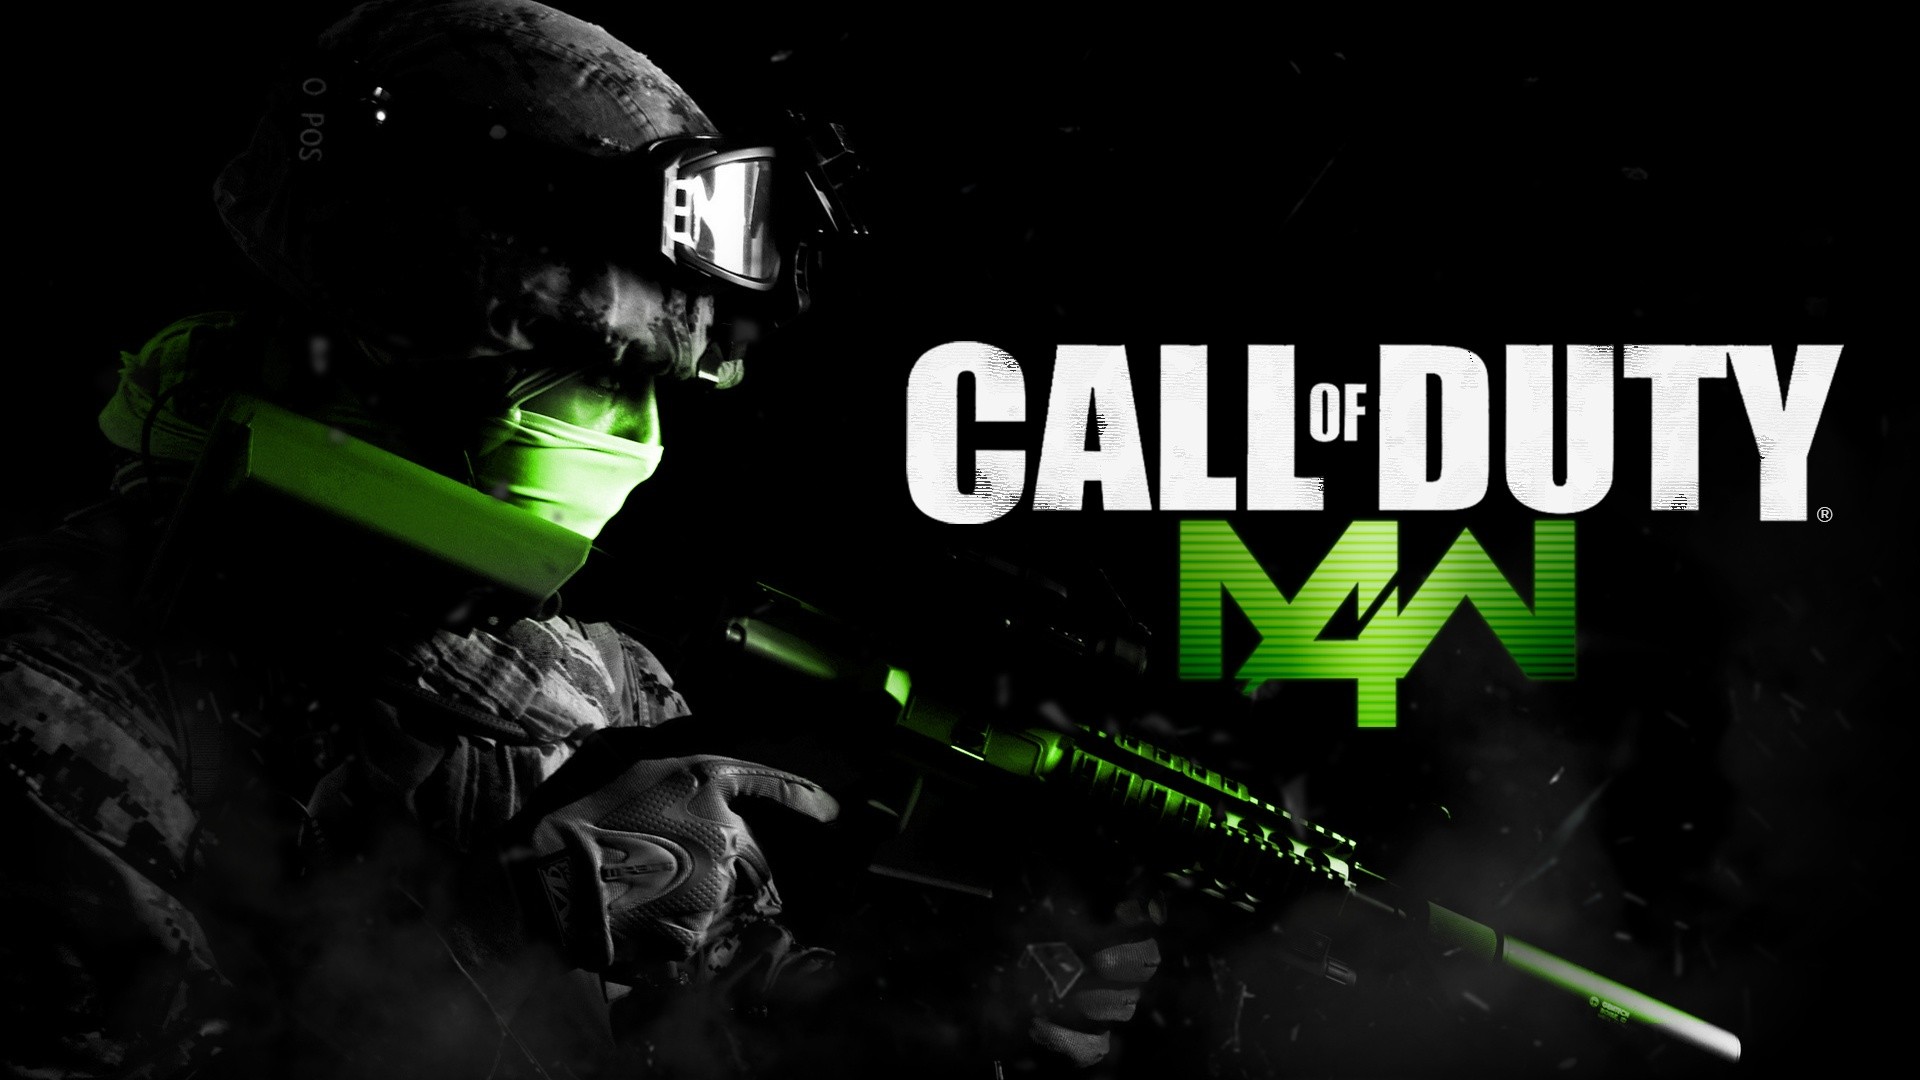 General 1920x1080 Call of Duty Call of Duty: Modern Warfare video games Call of Duty 4: Modern Warfare PC gaming soldier selective coloring weapon